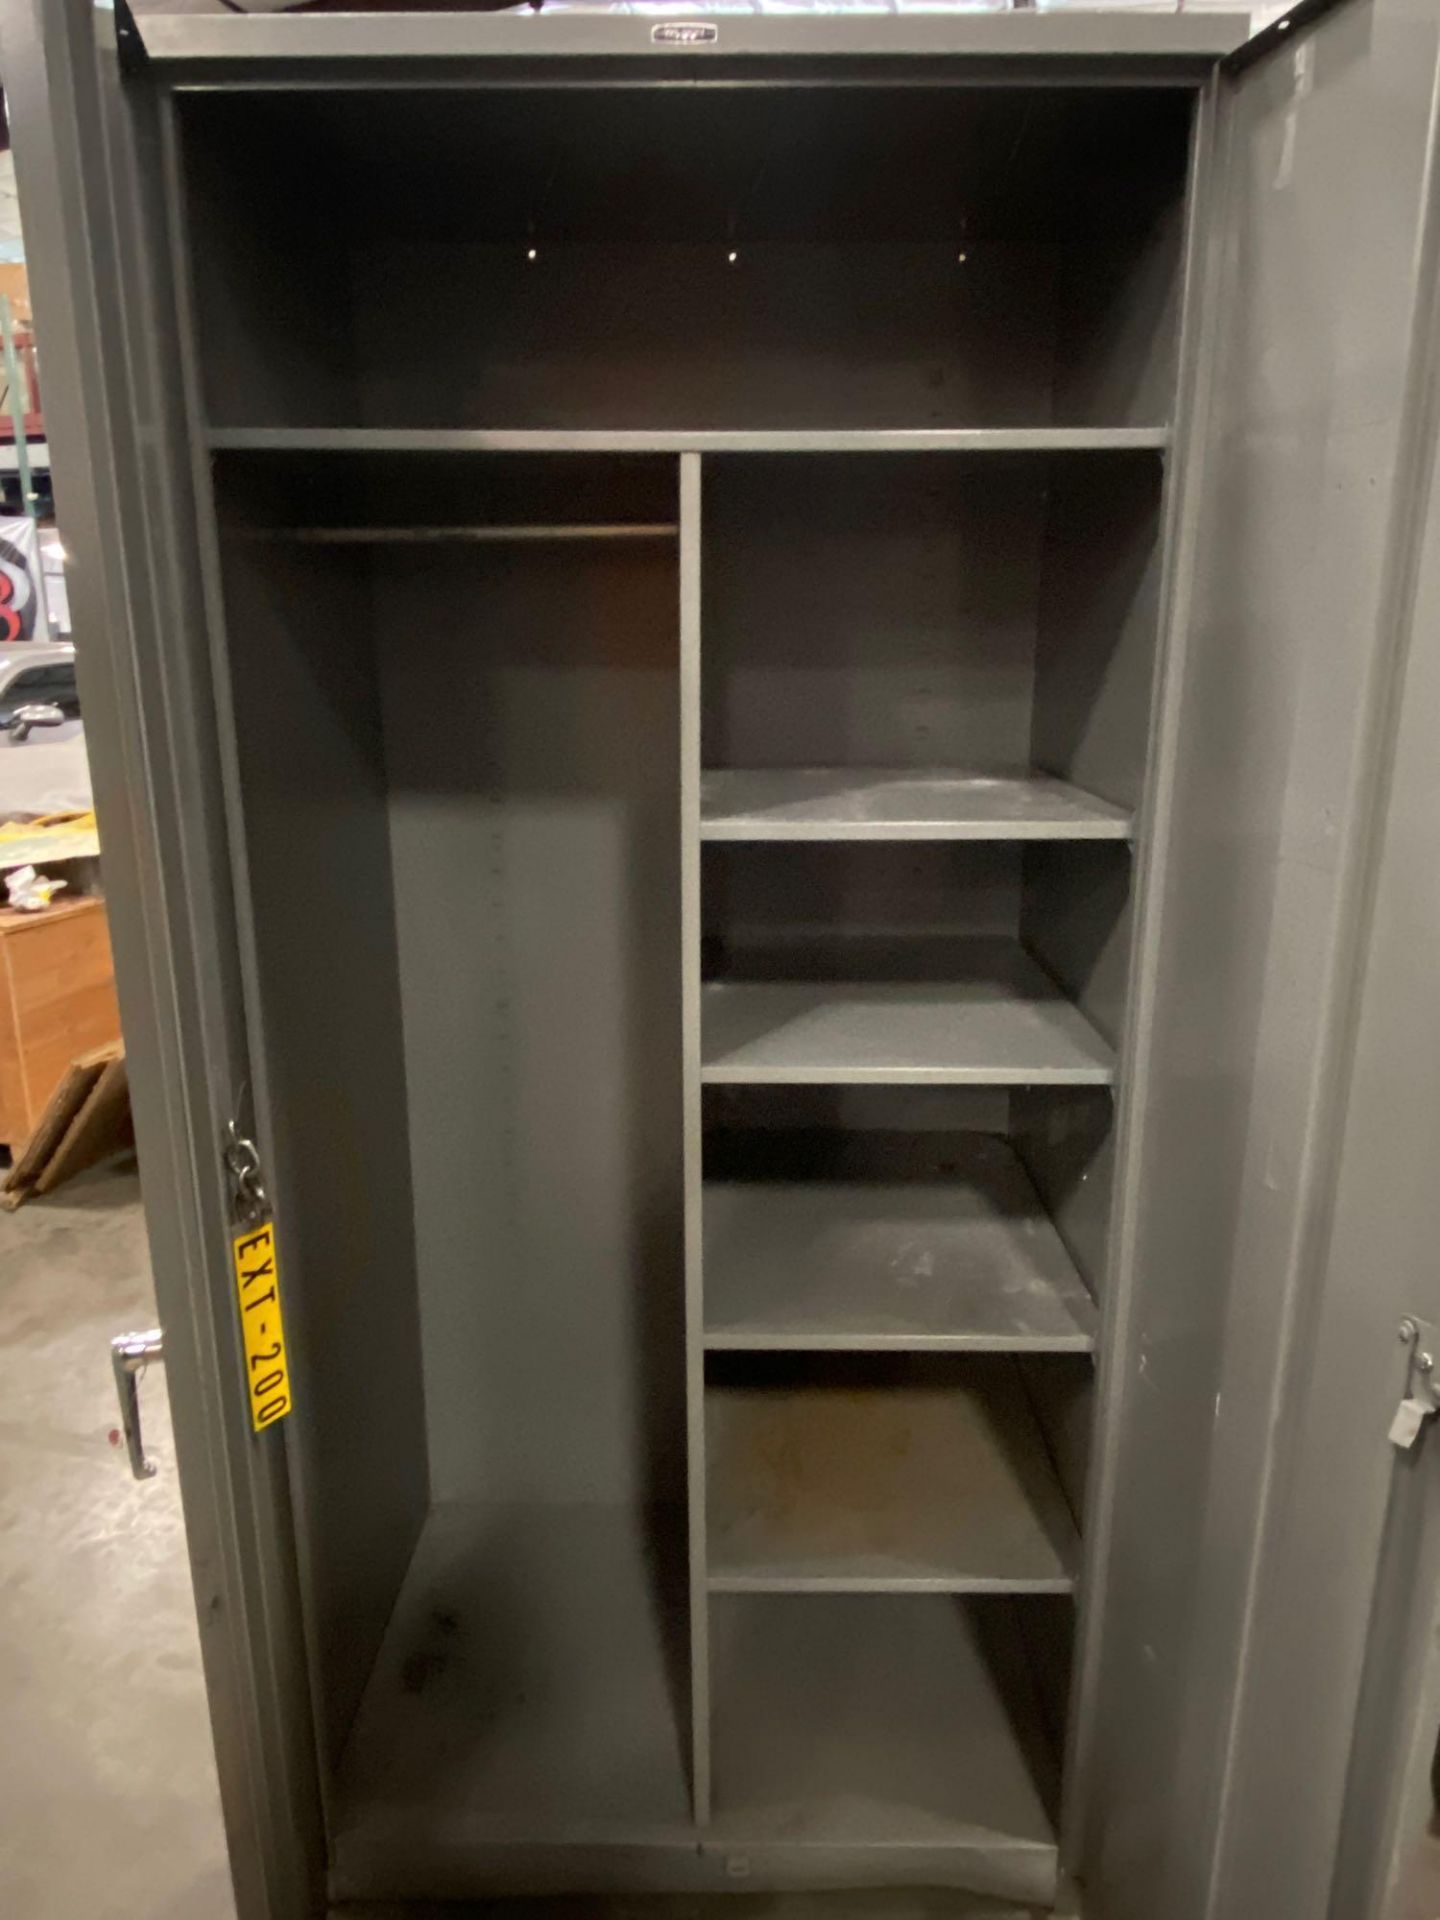 ANDREW WILSON COMPANY STORAGE CABINET 78”T 24”D 36”W - Image 6 of 8